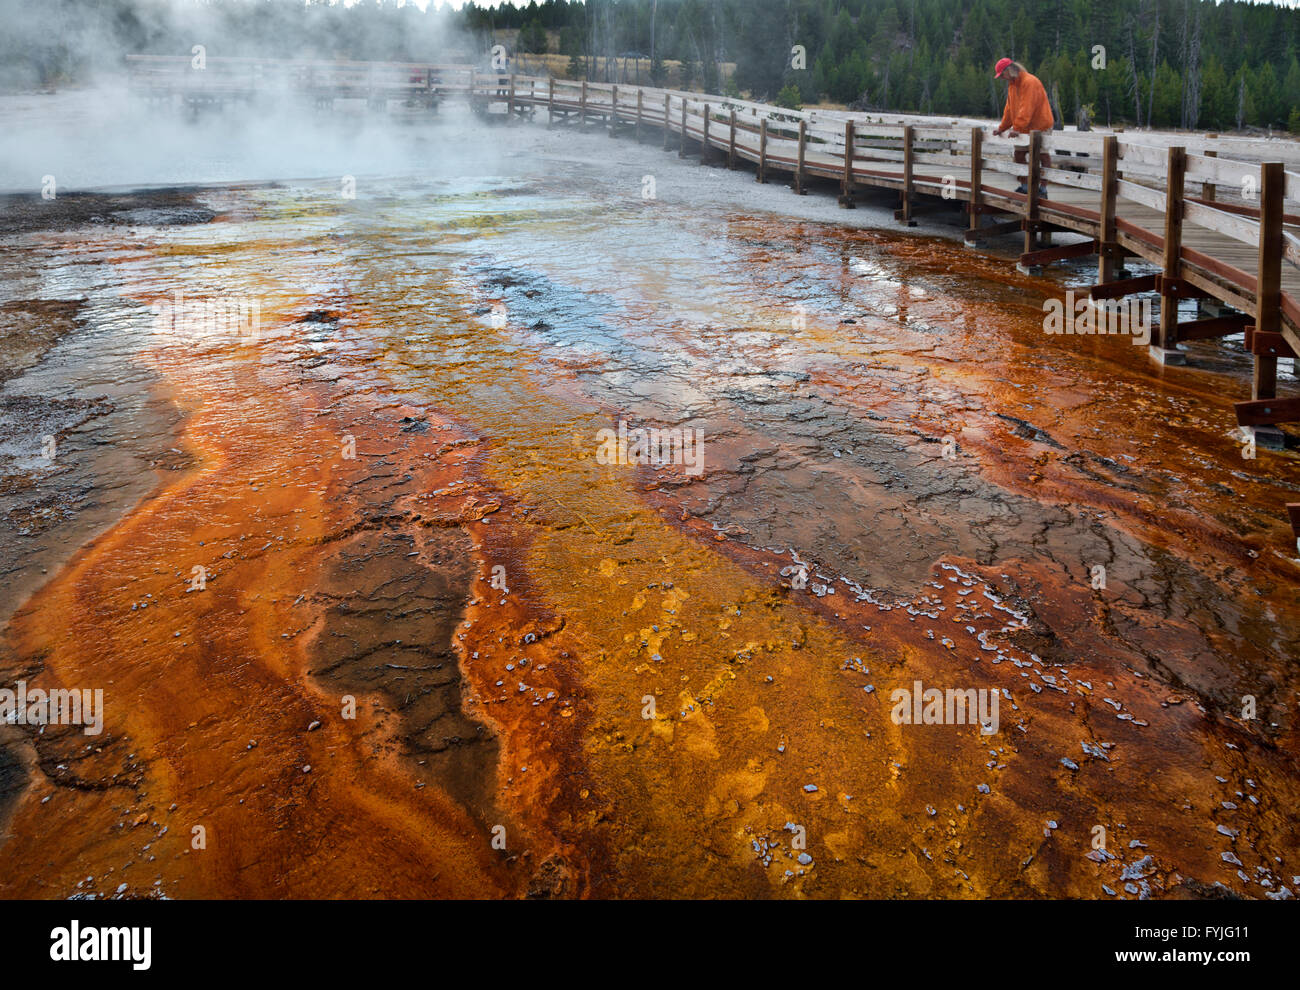 WYOMING - Tourist on boardwalk looking at the colorful algae at the Black Pool in the West Thumb of Yellowstone National Park. Stock Photo